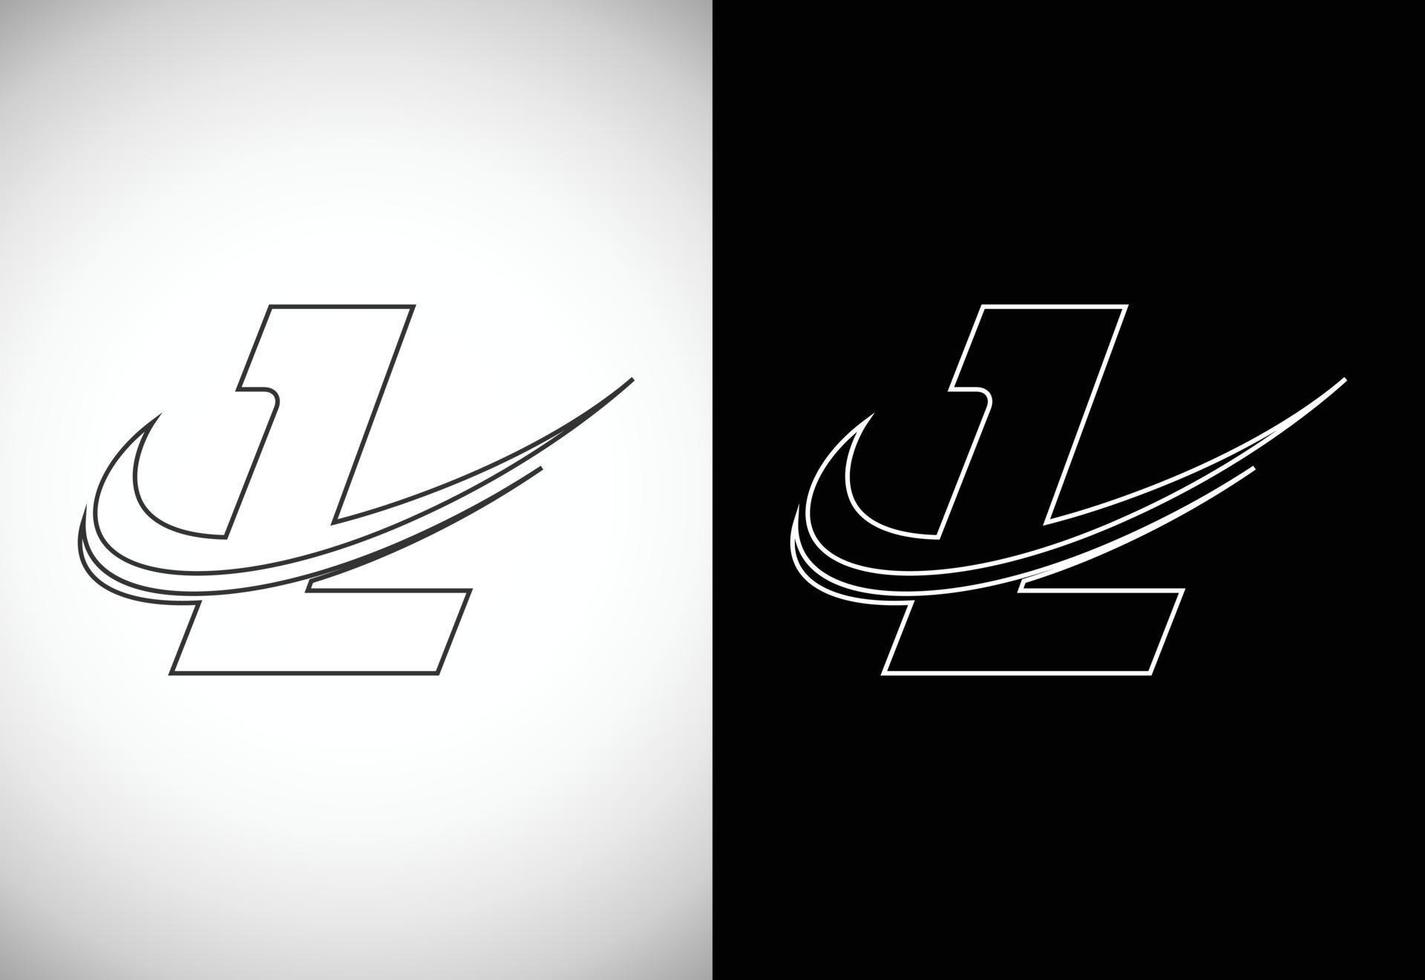 Initial letter L with a swoosh line art-style logo. Modern vector logotype for business and company identity.